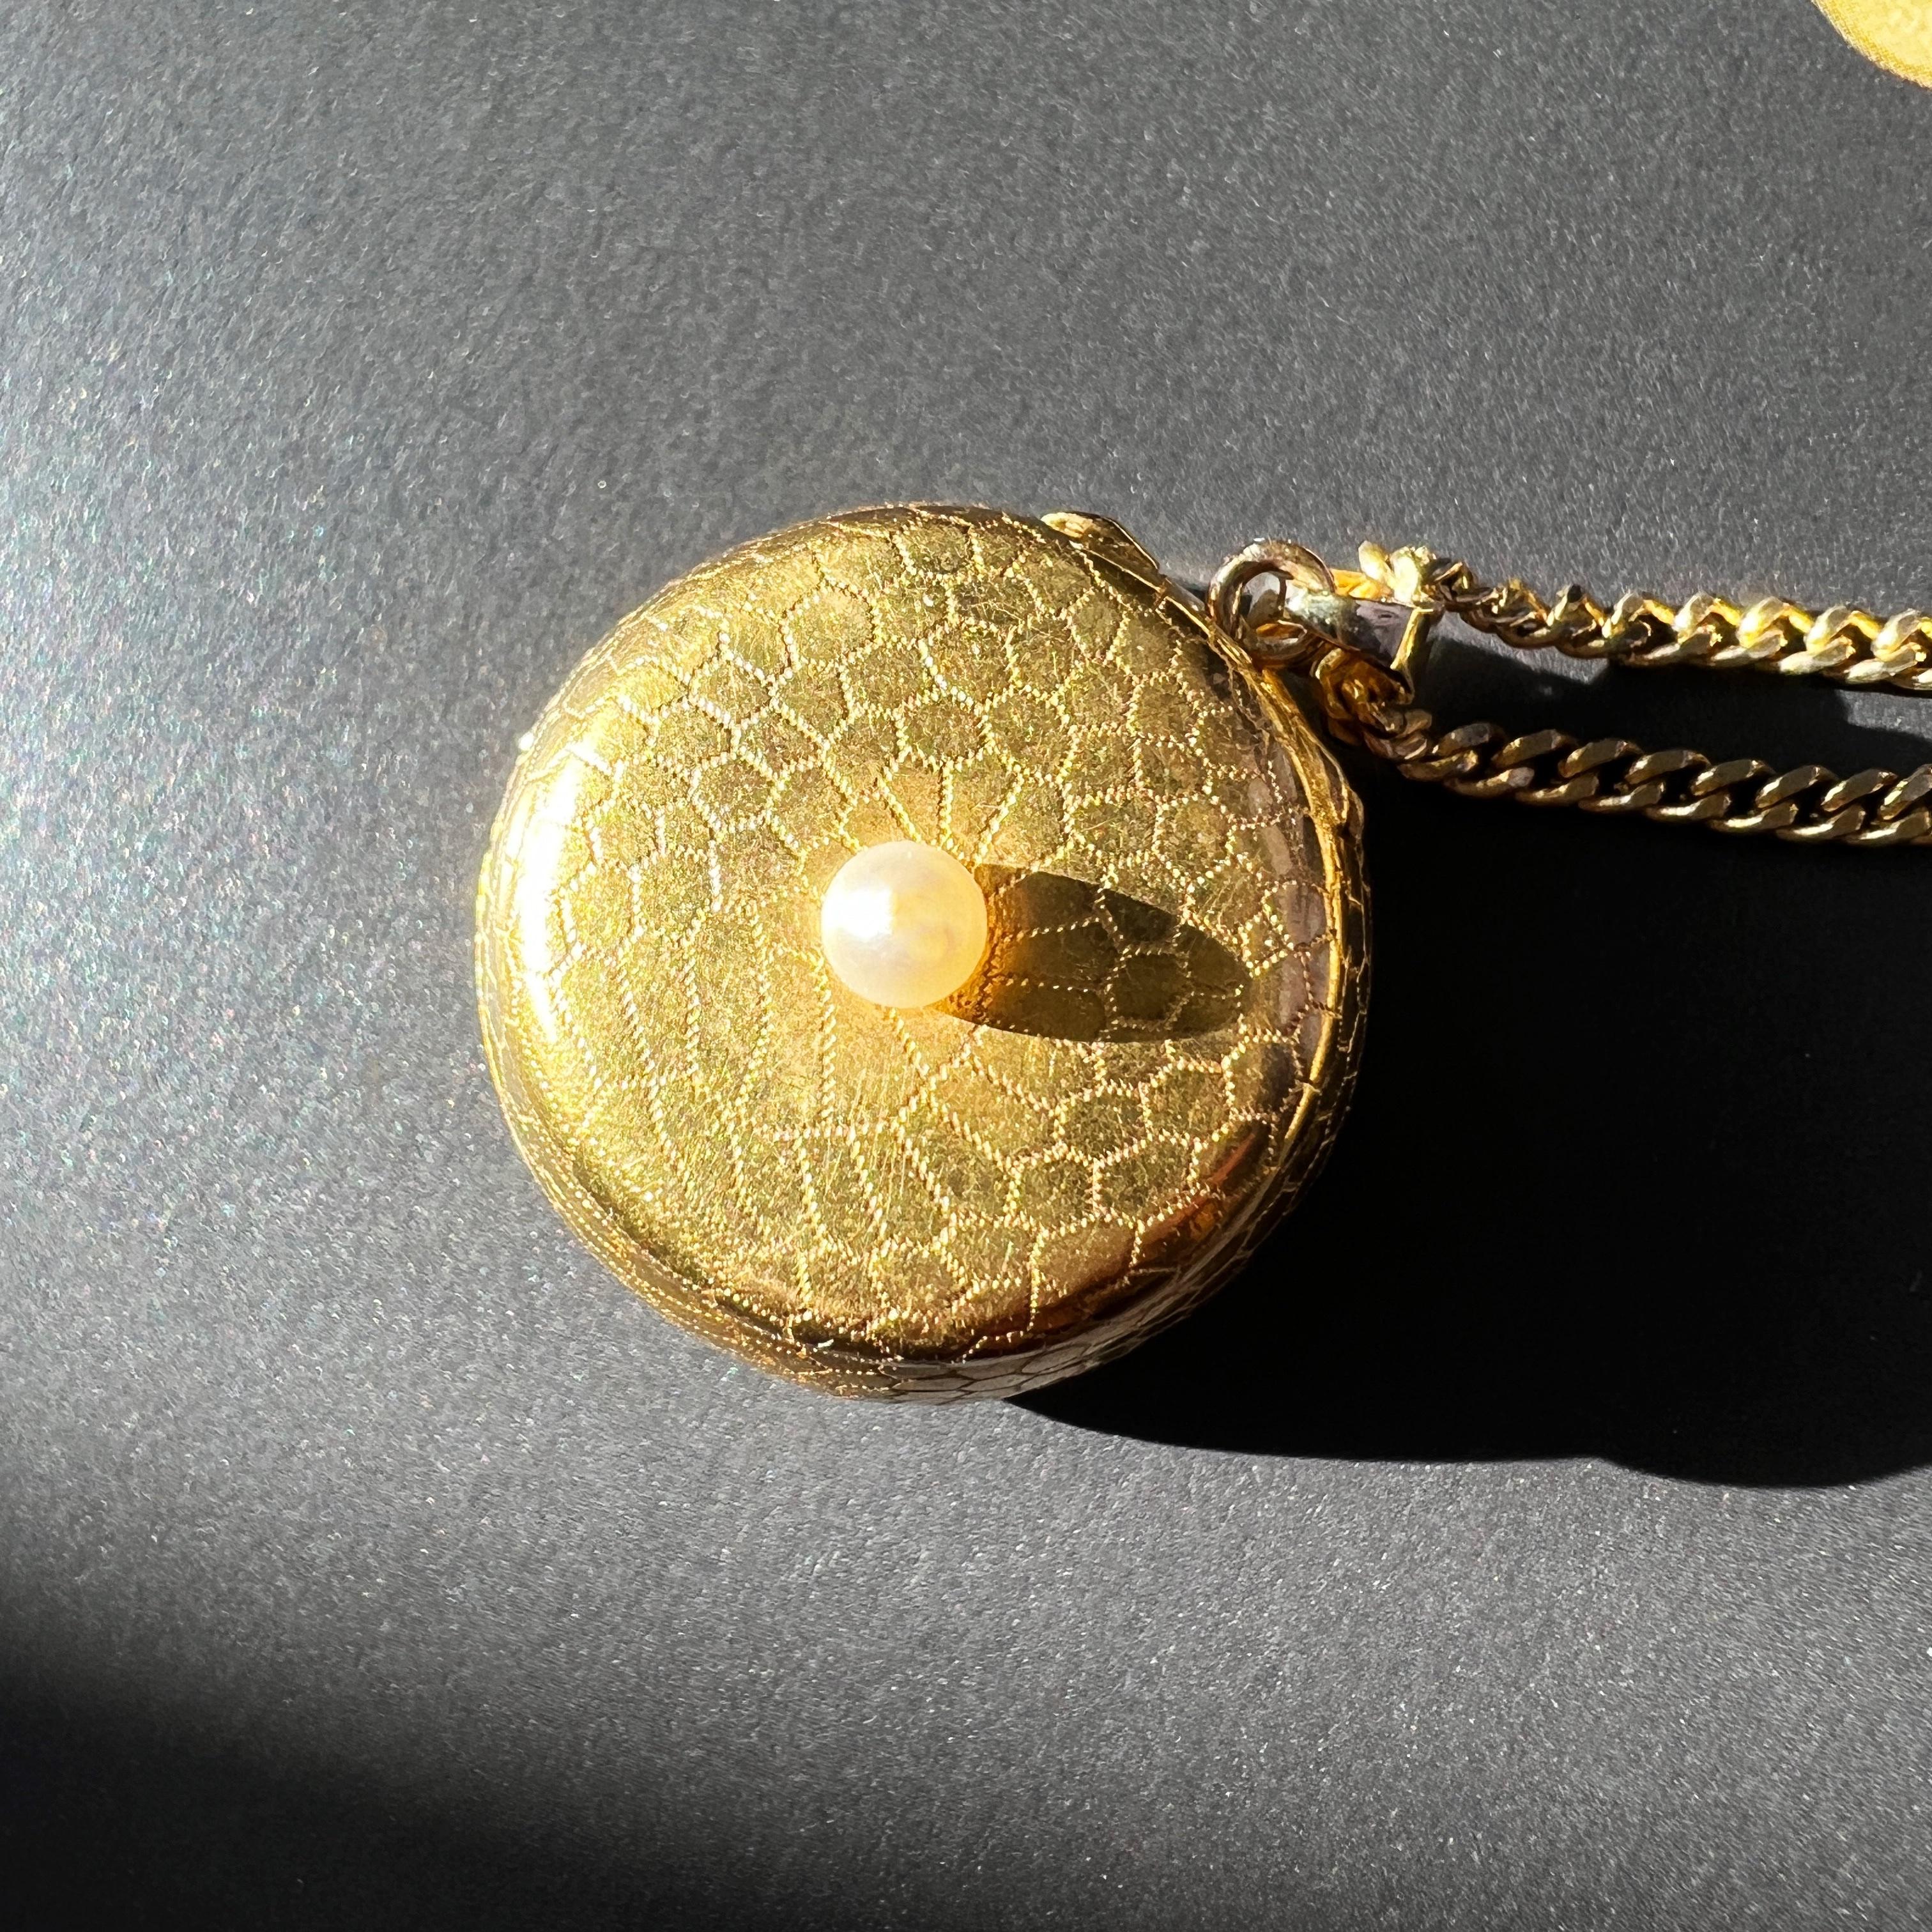 For sale a very rare French antique 18k gold perfume box pendant, adorned with intricate geometric gold motifs reminiscent of delicate honey patterns.

Unlocking its secrets reveals a hidden compartment separated by a refined floral window, once